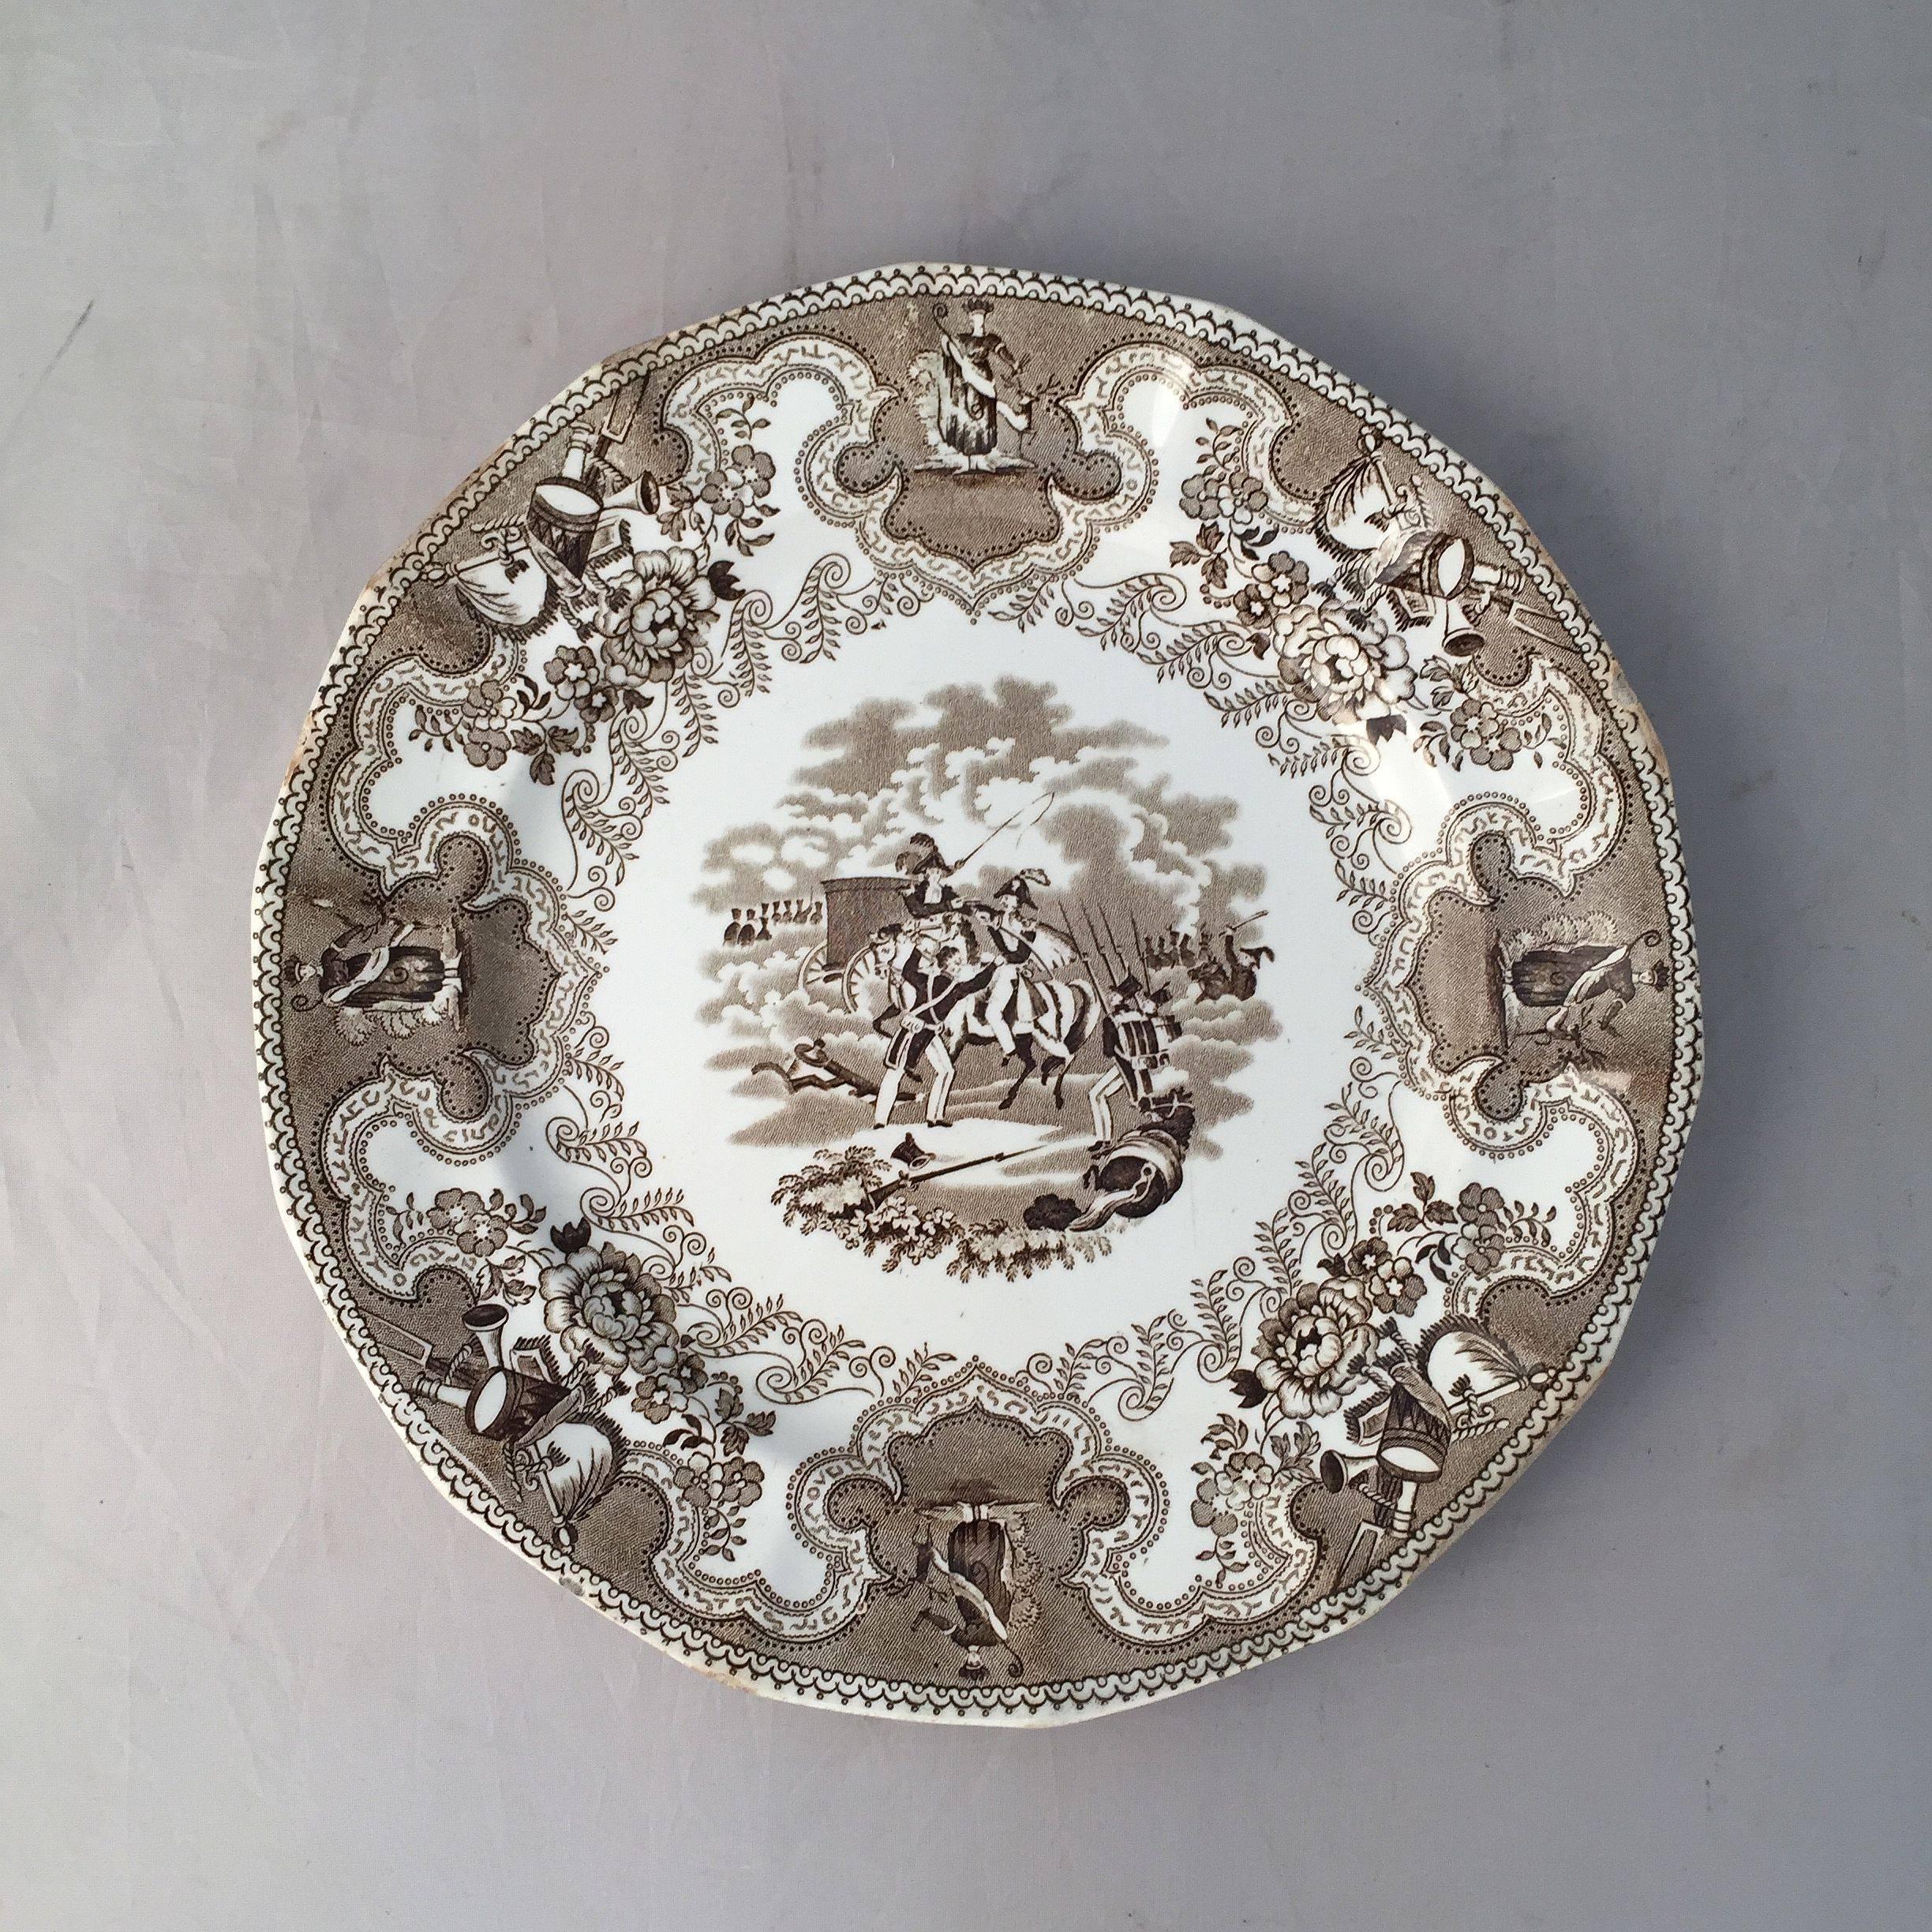 A fine English china plate with the sought-after 'Texian Campaigne' pattern in brown and white transfer ware by Thomas Walker, circa 1845-1851.

Also known as Texan Campaign, Texian Campaigne, a most popular American Historical Staffordshire